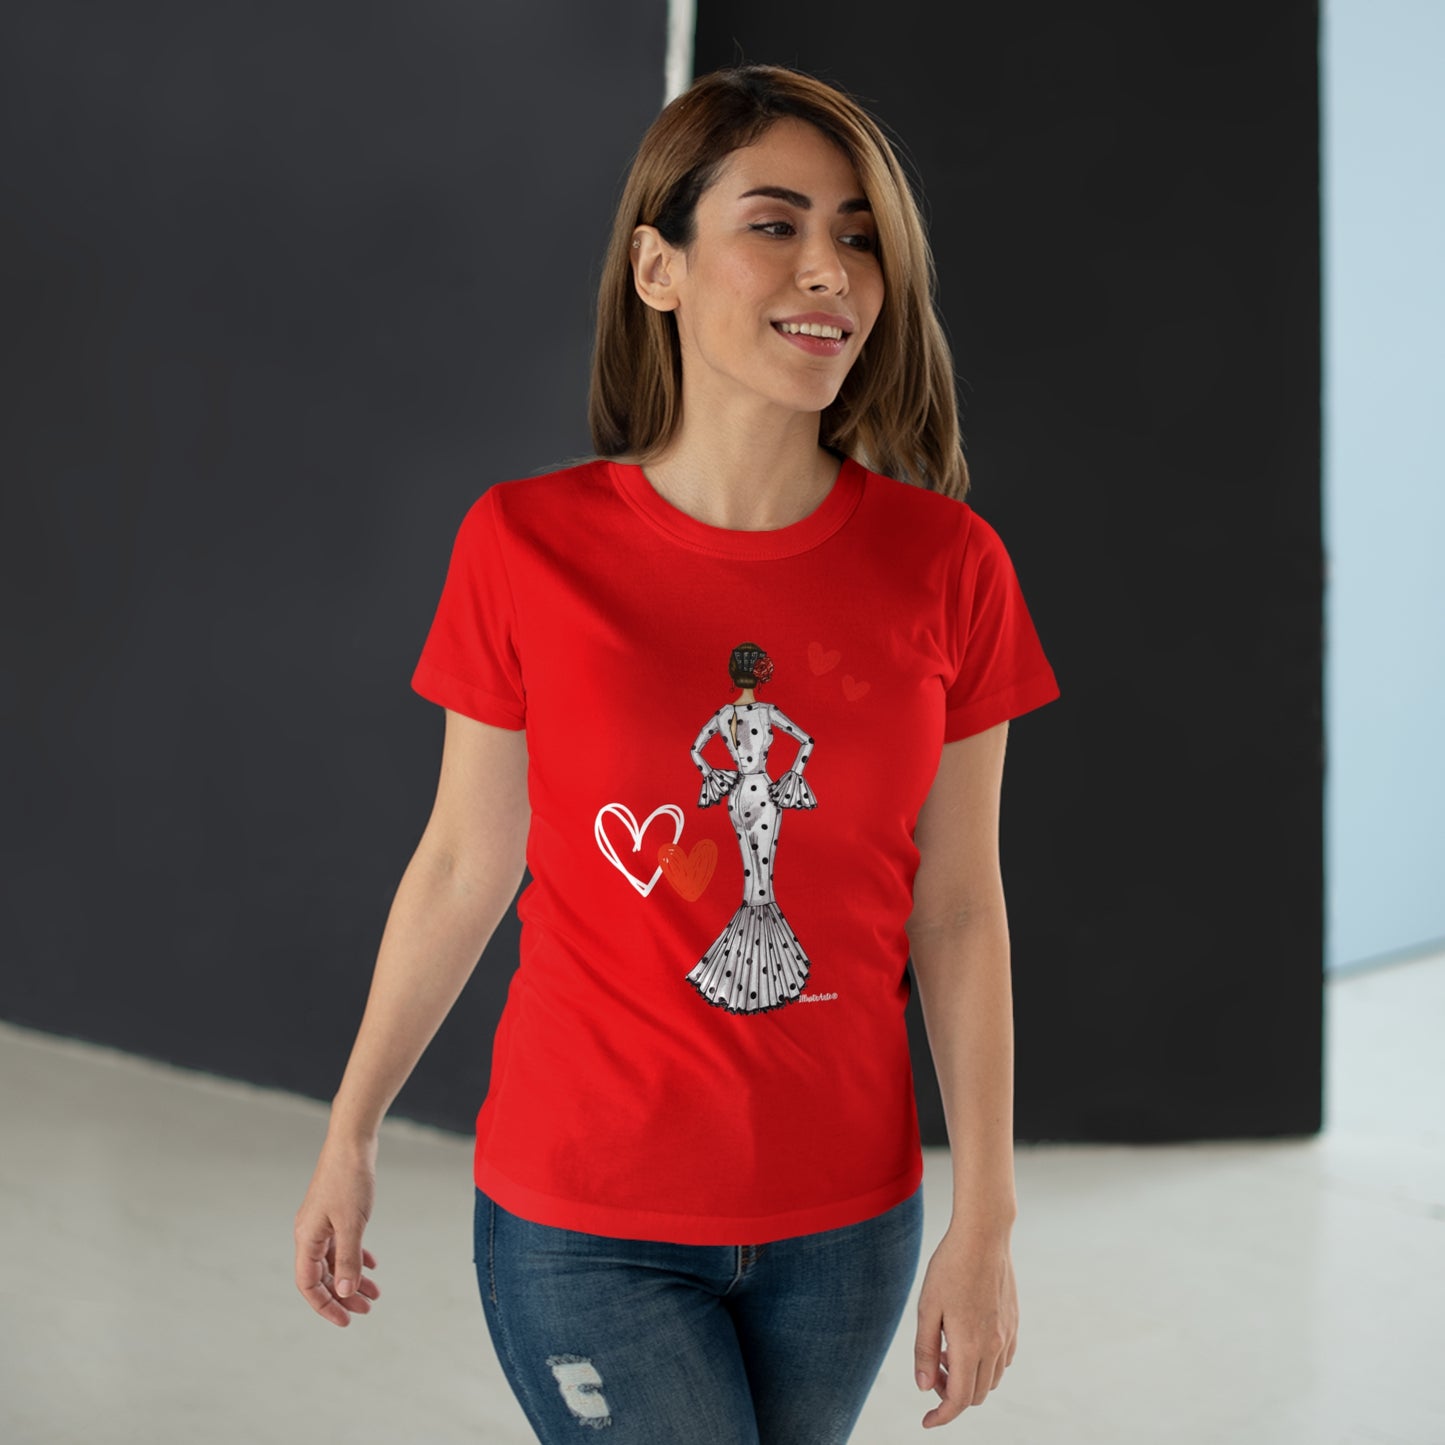 a woman wearing a red t - shirt with a heart on it